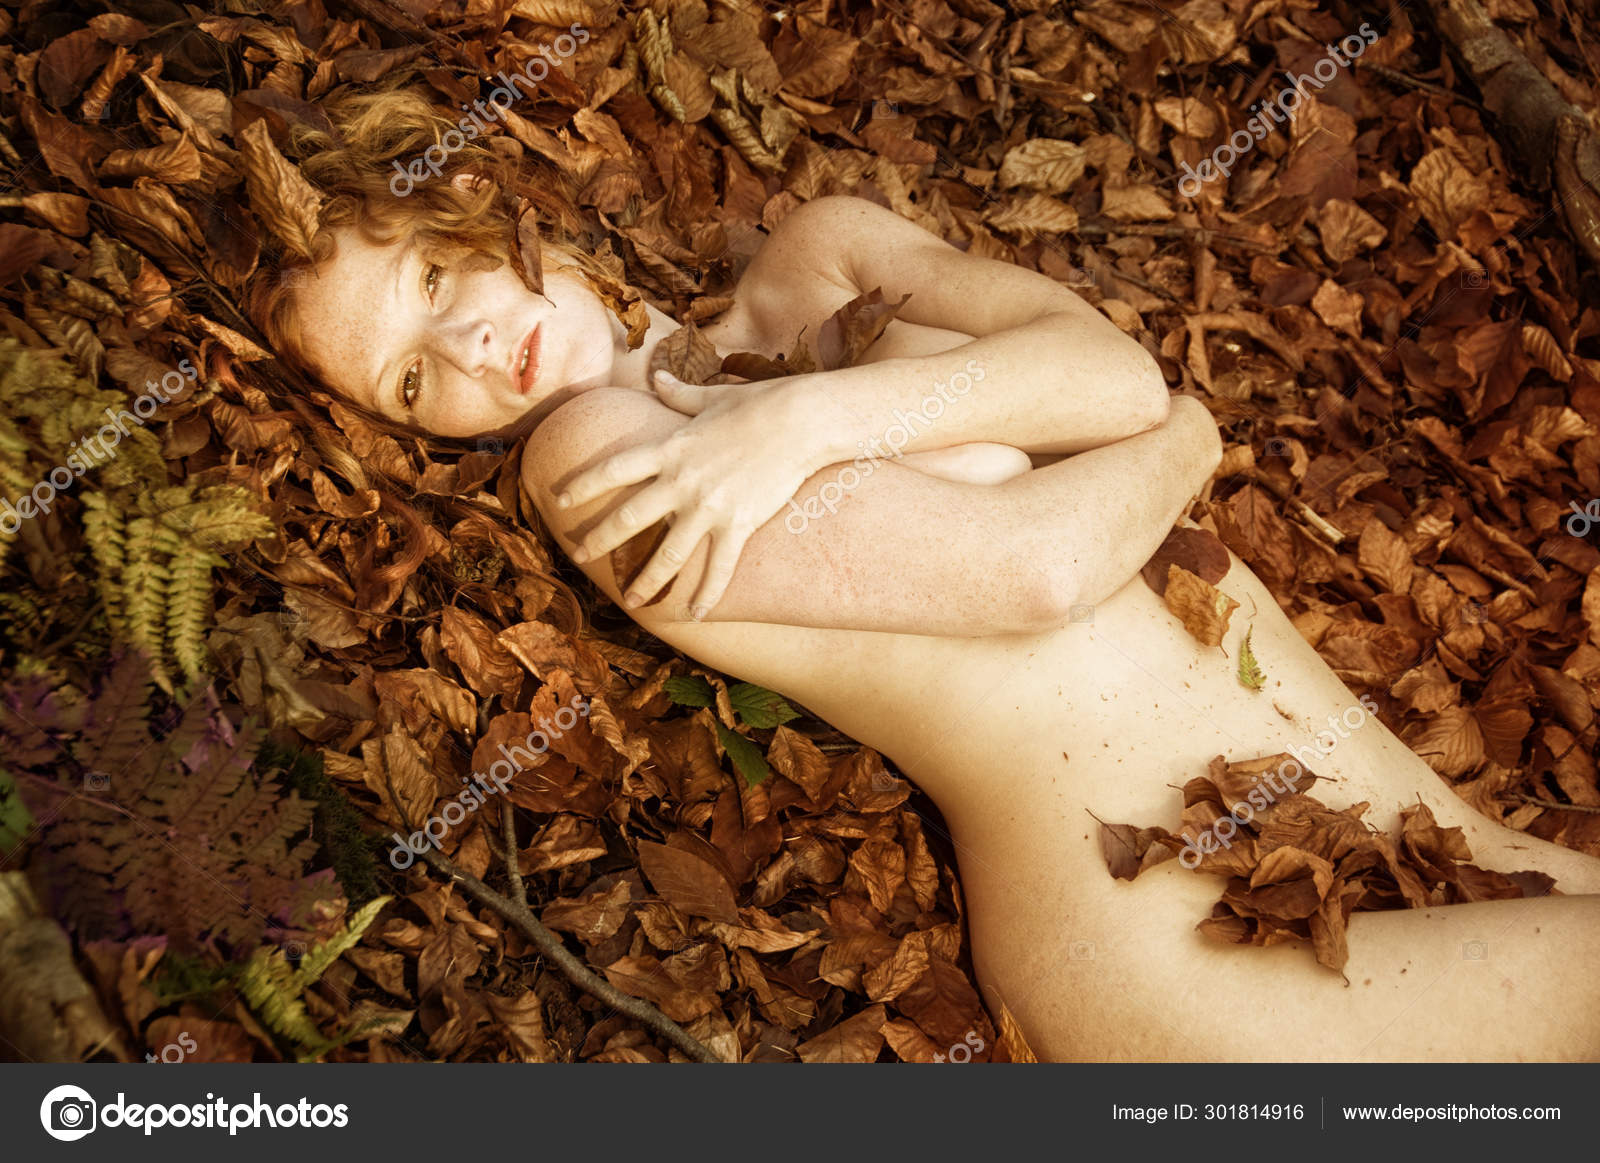 Golden-Haired sexy beauty undressed in park